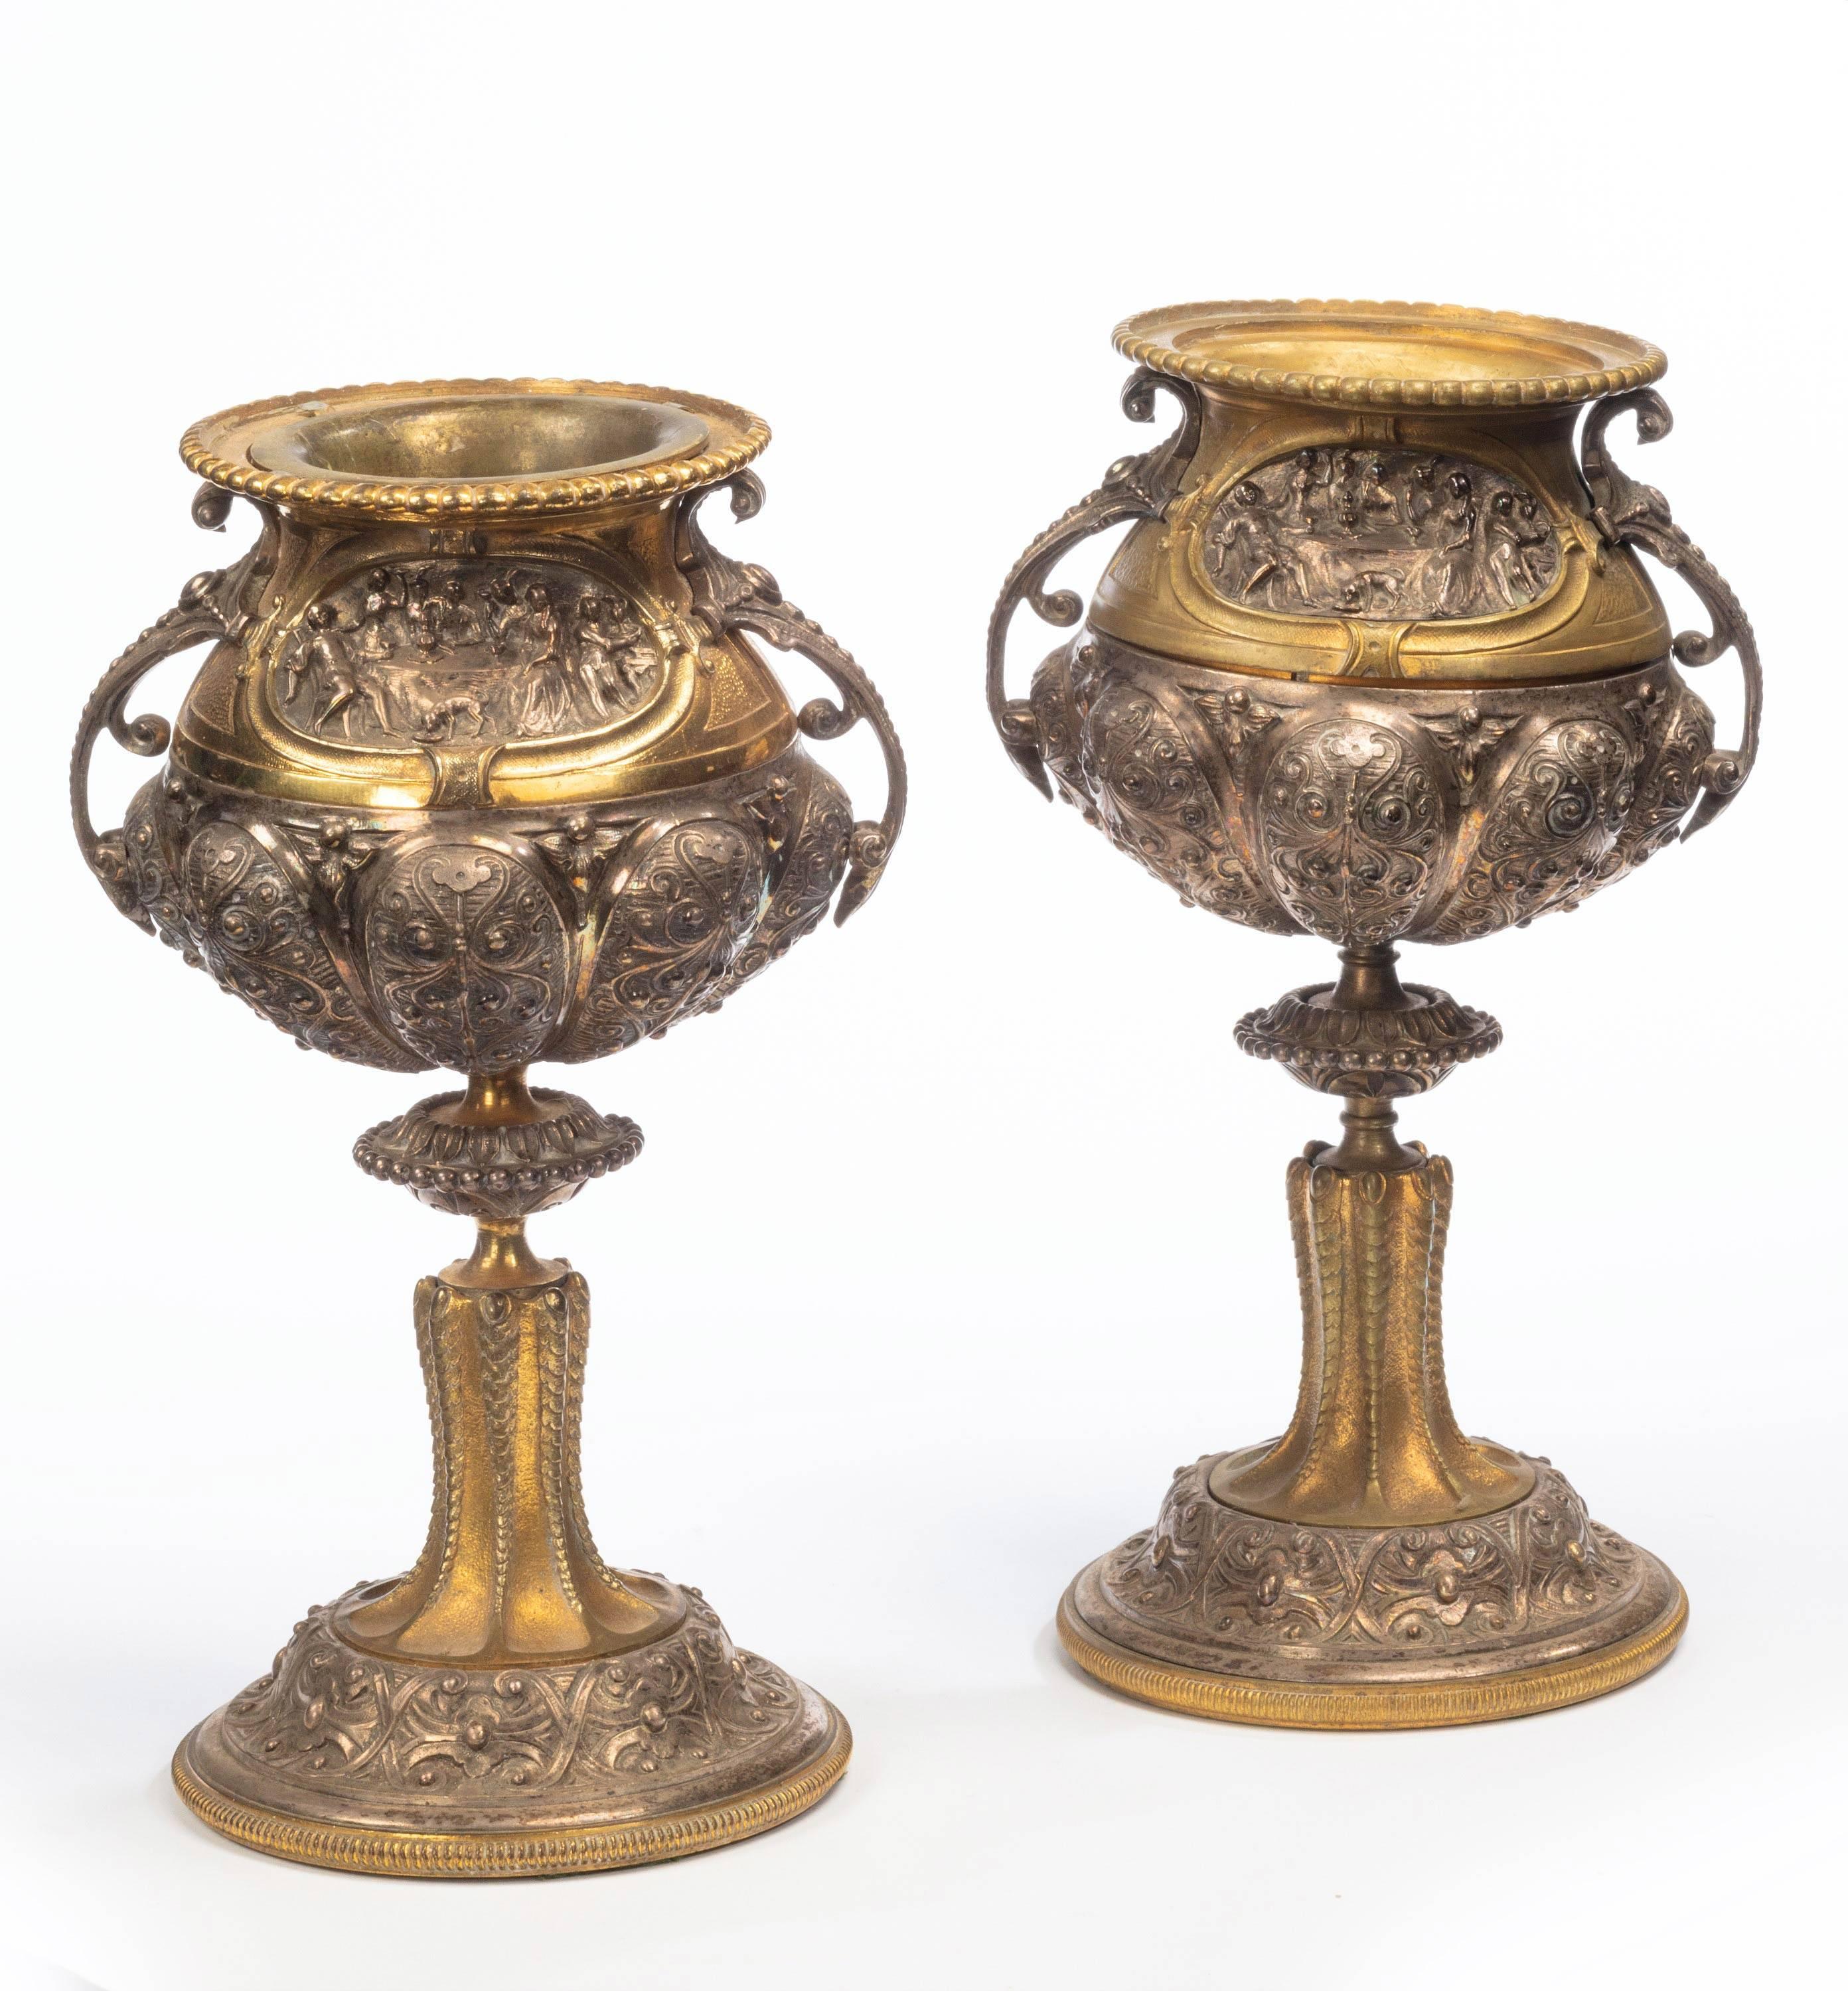 A pair of 19th century well-cast and elaborate gilt bronze and bronze vases of cup form. With very elaborate decoration. Now well and evenly patinated.
     